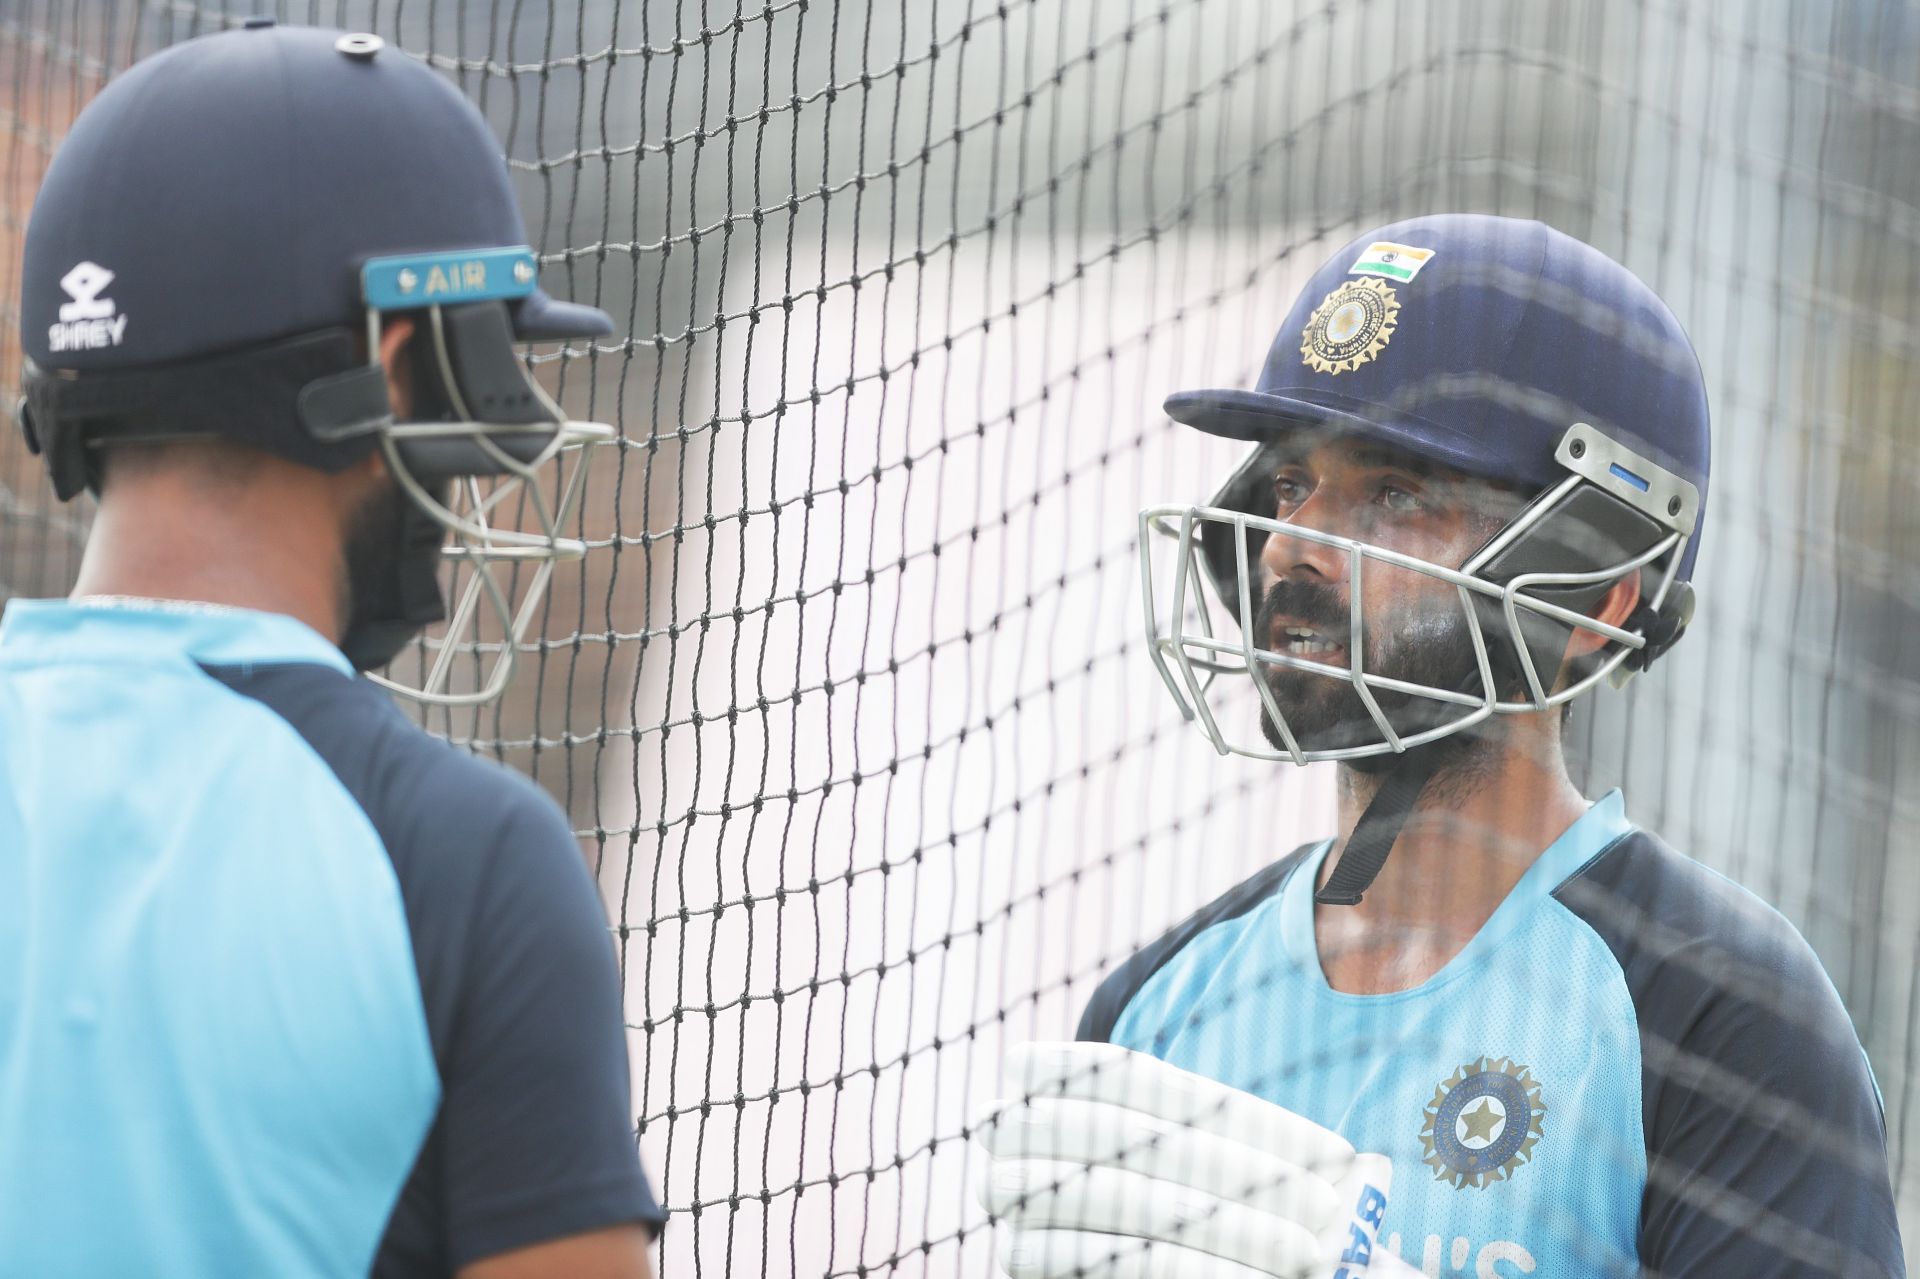 Aakash Chopra feels the Indian middle order will have to stand up and be counted.